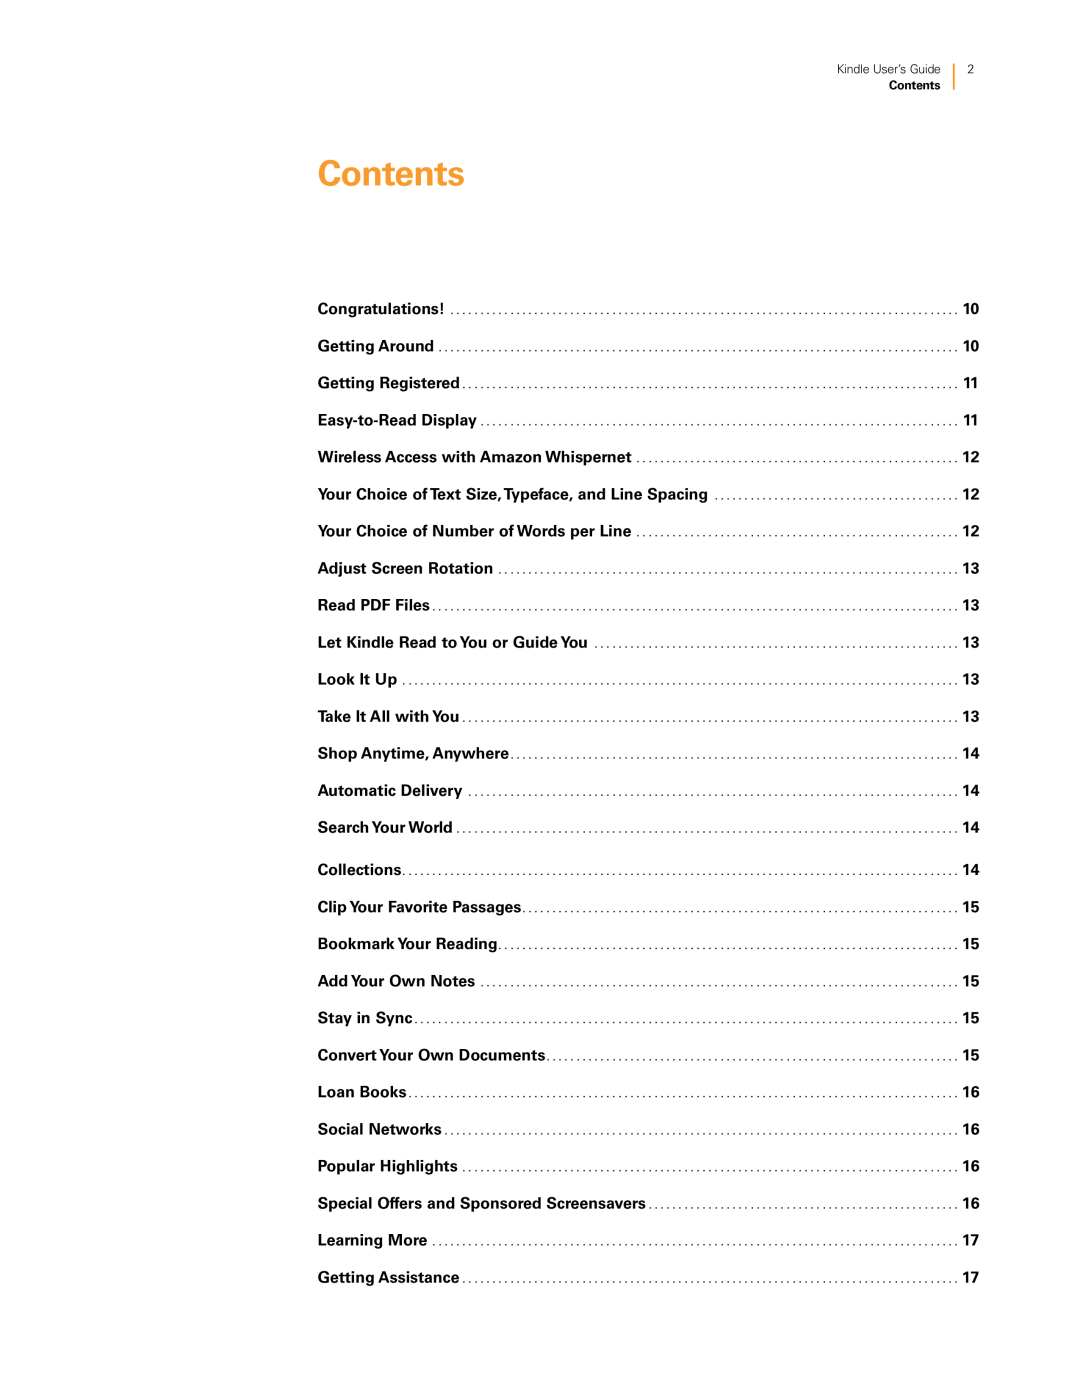 Amazon KNDKYBRD3G Contents, Congratulations, Getting Around, Getting Registered, Easy-to-Read Display, Read PDF Files 